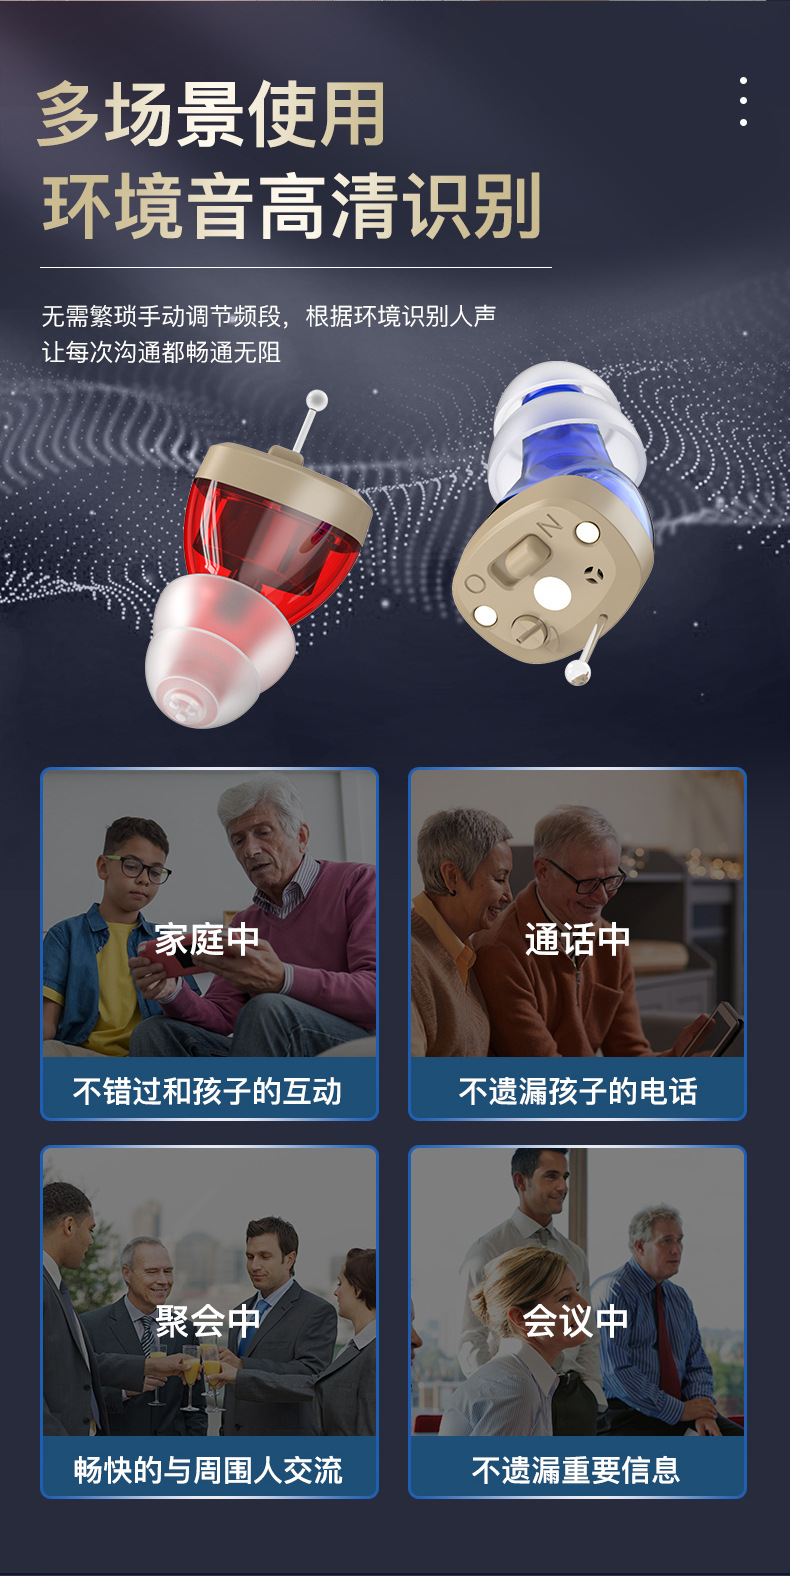 New Digital Hearing Aid With Digital Display Chamber Ear Canal Sound Amplifier For The Elderly Sound Collector Accessories